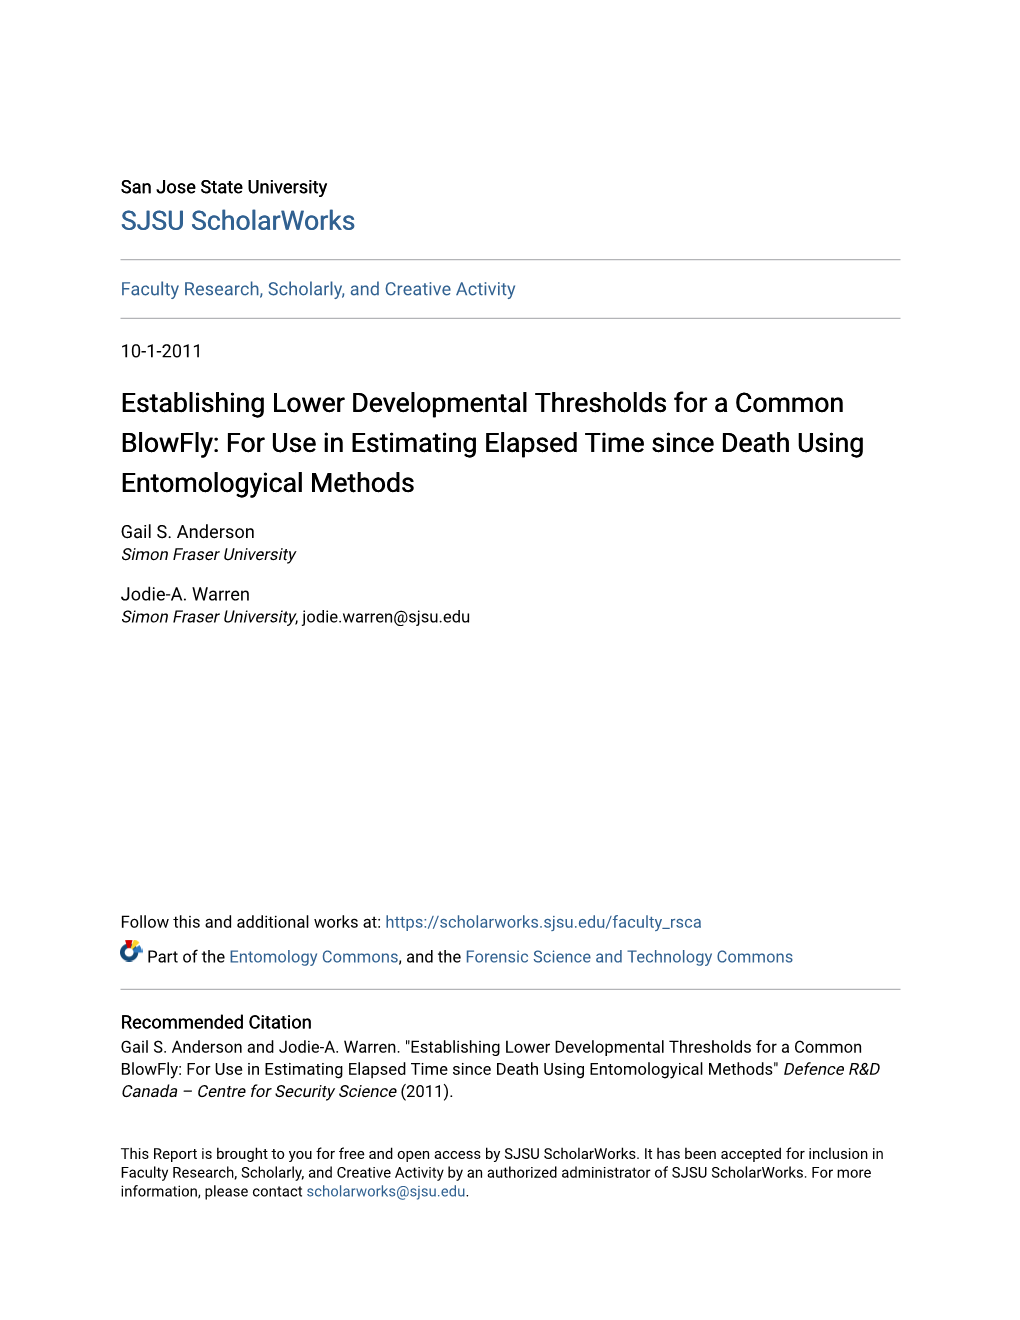 Establishing Lower Developmental Thresholds for a Common Blowfly: for Use in Estimating Elapsed Time Since Death Using Entomologyical Methods